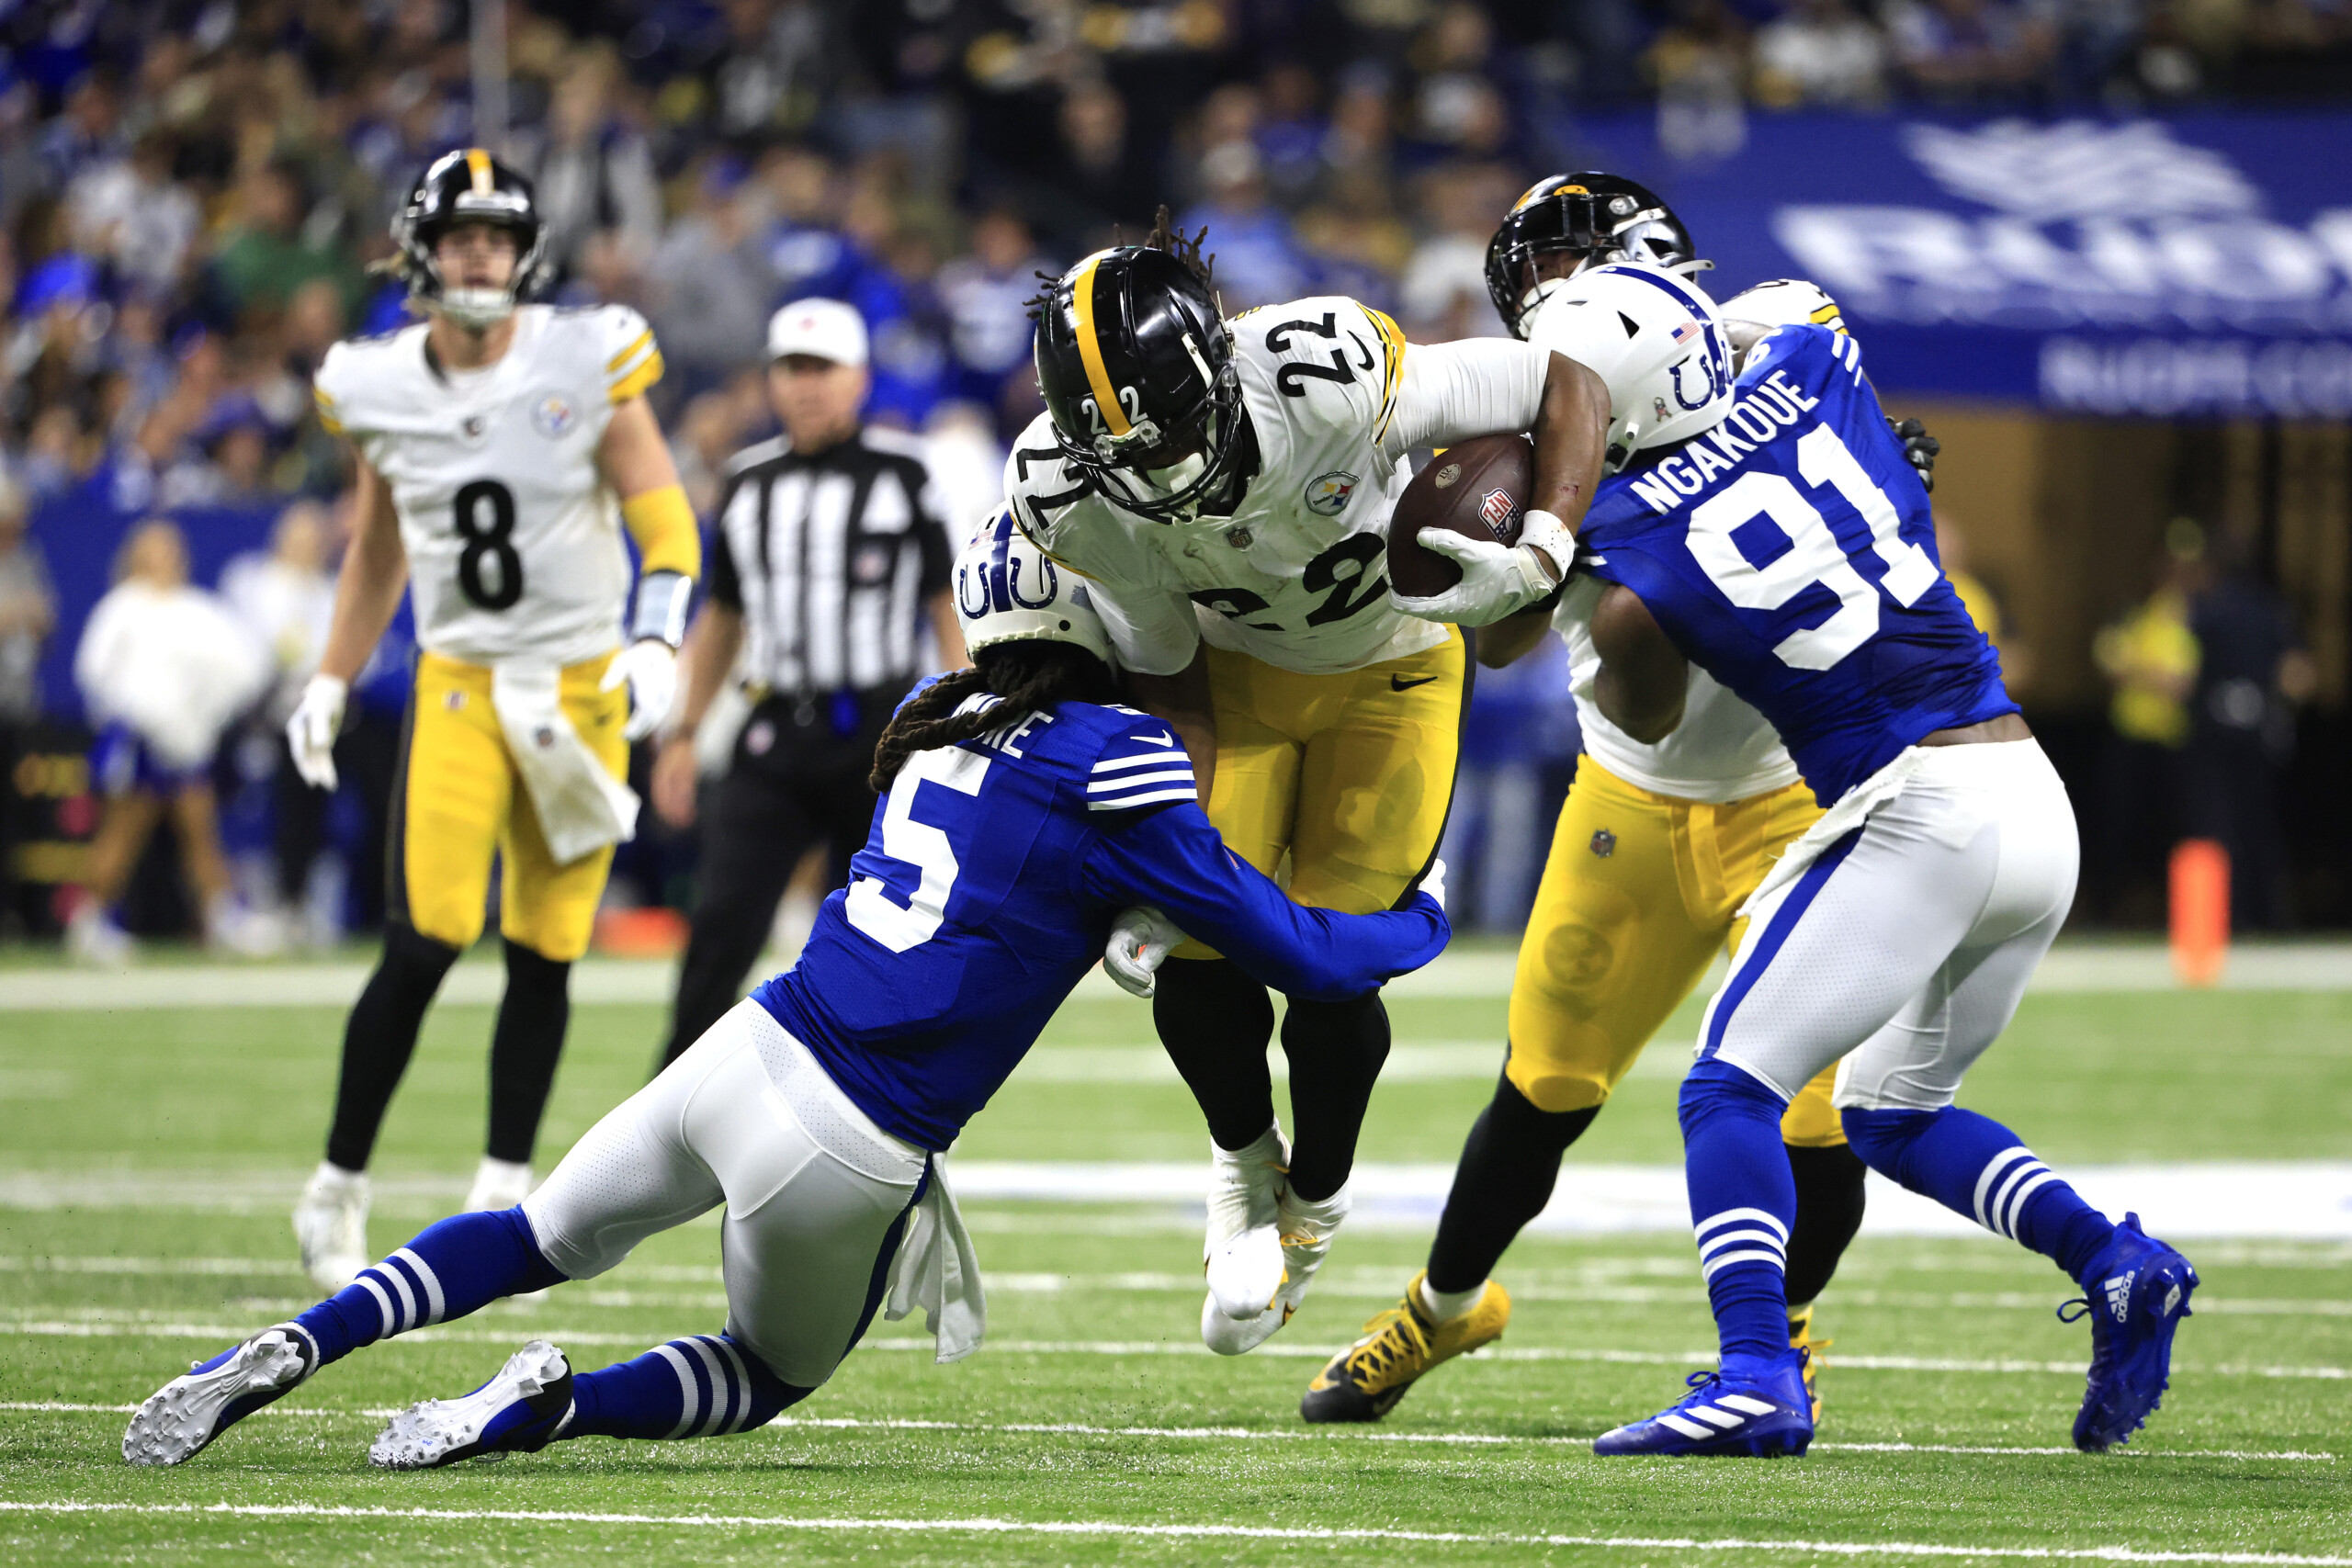 Snell runs for go-ahead TD, Steelers hold off Colts 24-17 - WISH-TV, Indianapolis News, Indiana Weather